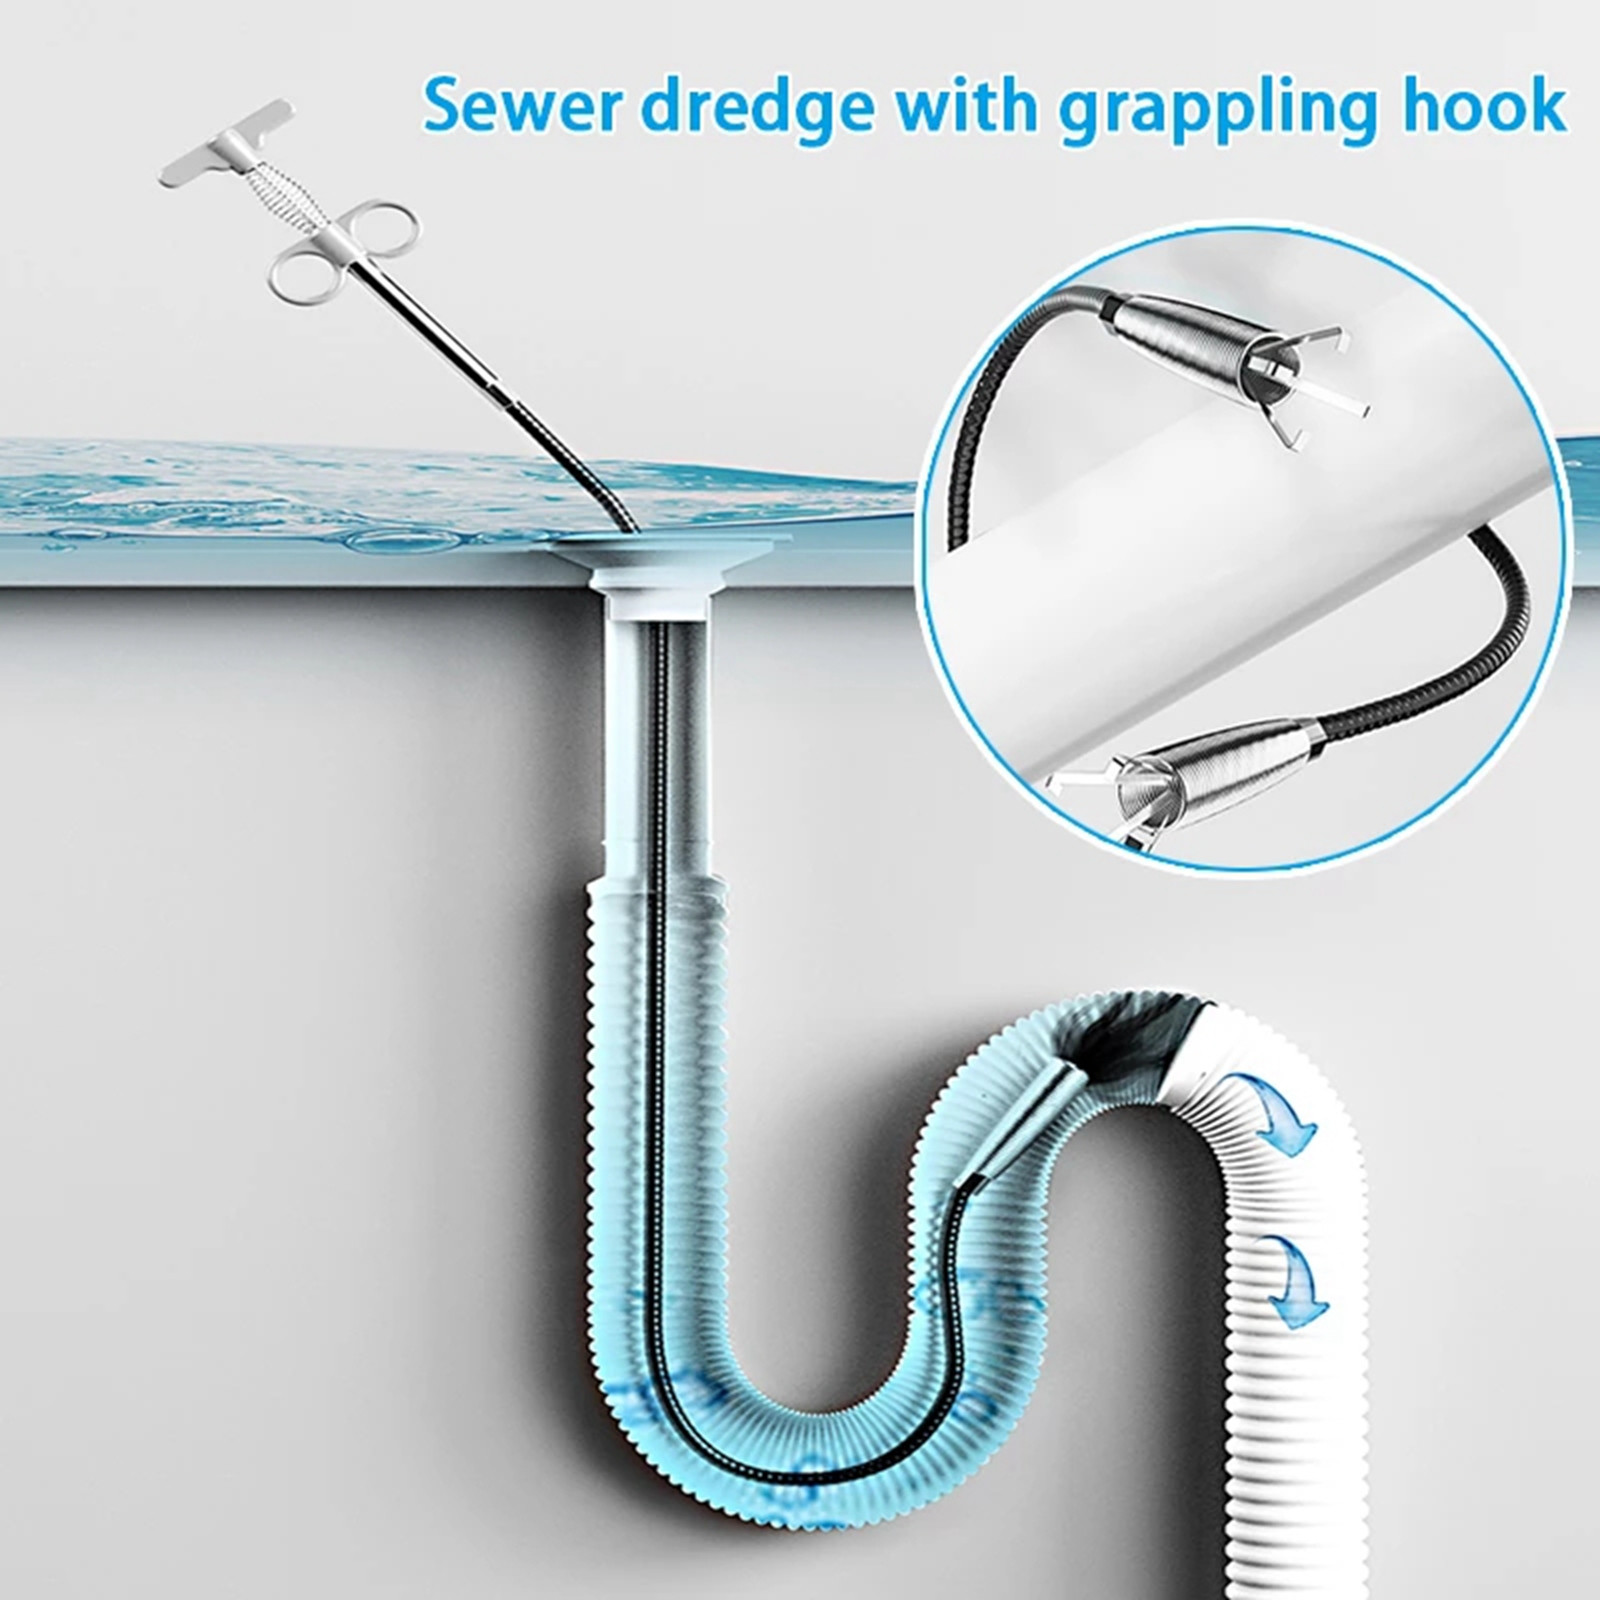 Sink Drain Clog Remover Grappling Hook Wire Spring Pipe Dredging Dredger Sewer Cleaning Unblocker Pipes for of Blockages Cable